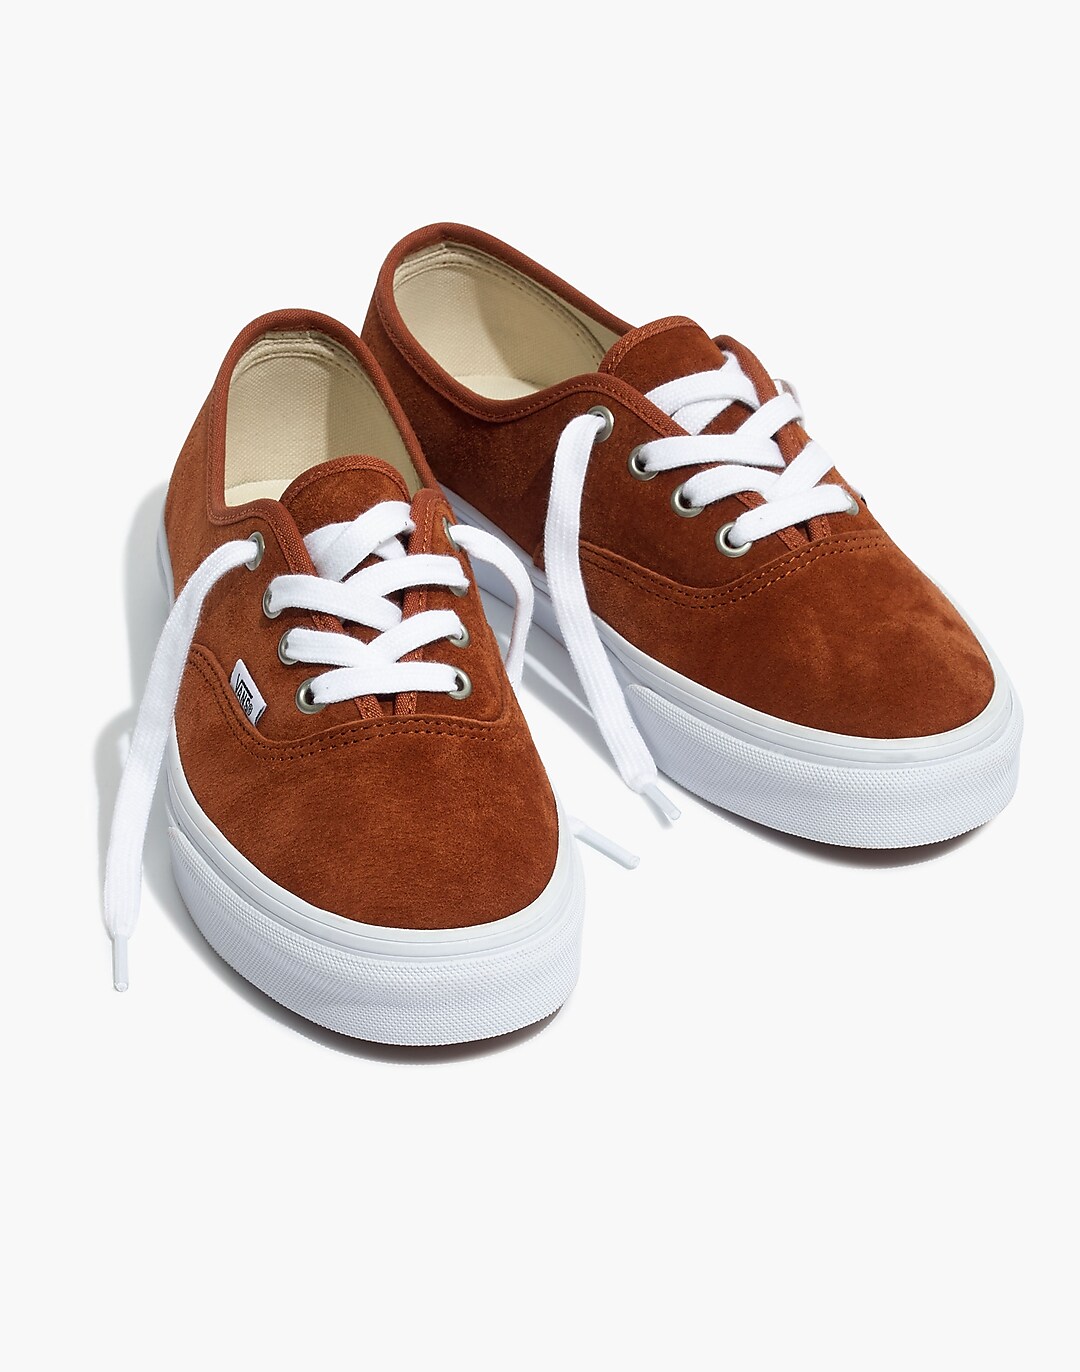 Vans® Unisex Authentic Lace-Up in Brown Suede